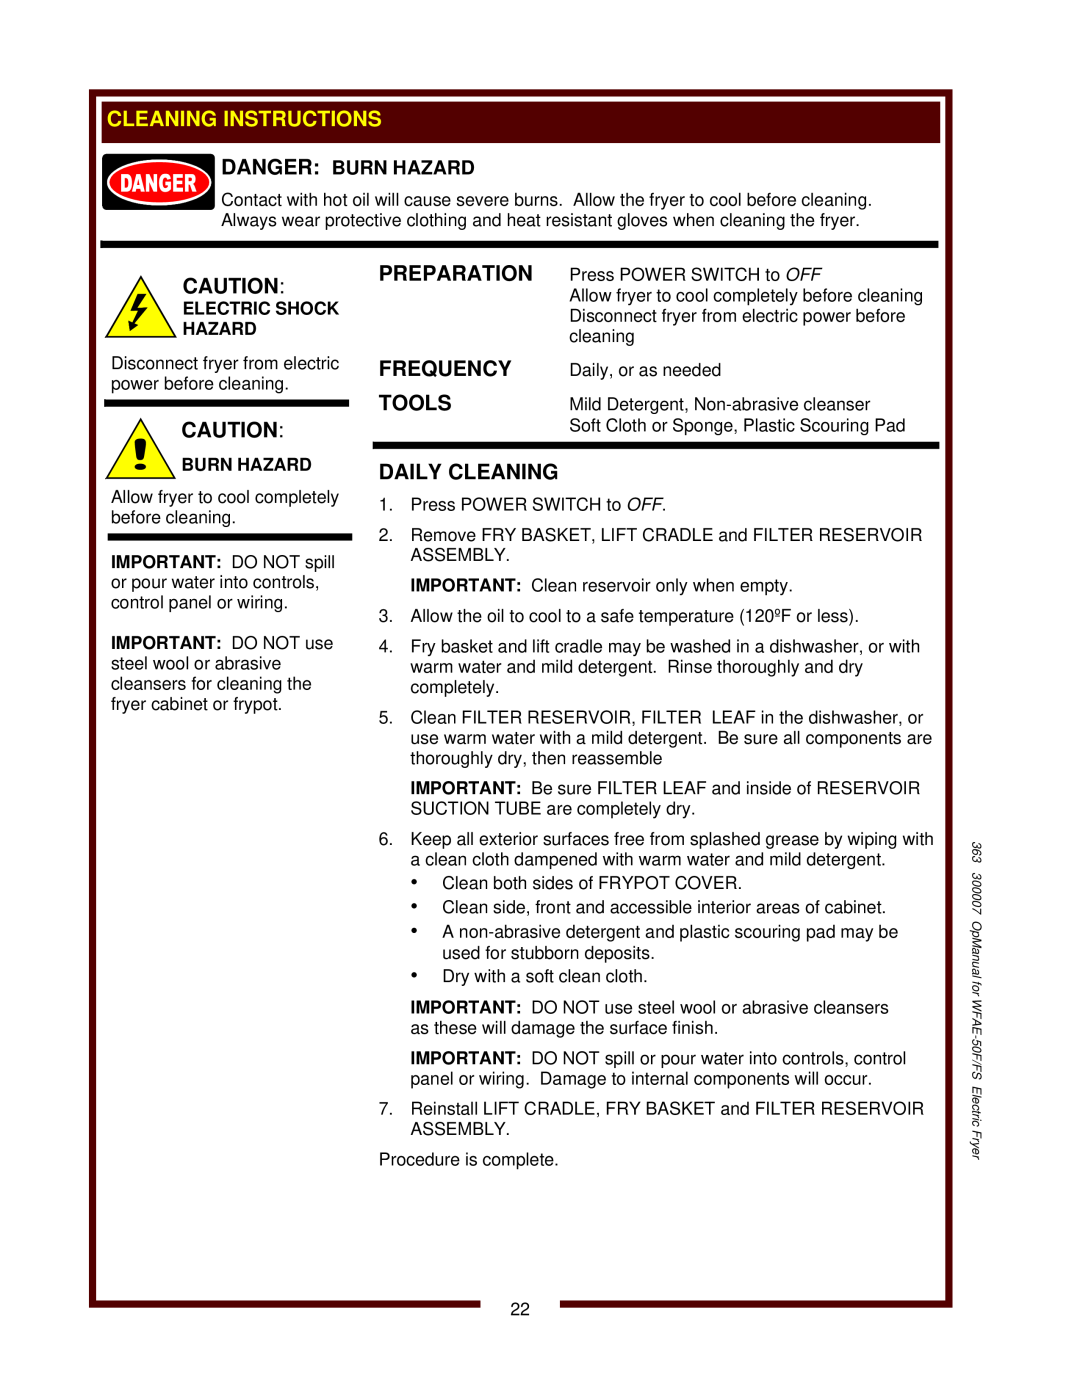 Wells WFAE-55F operation manual Cleaning Instructions, Preparation, Frequency, Tools, Daily Cleaning, Danger Burn Hazard 